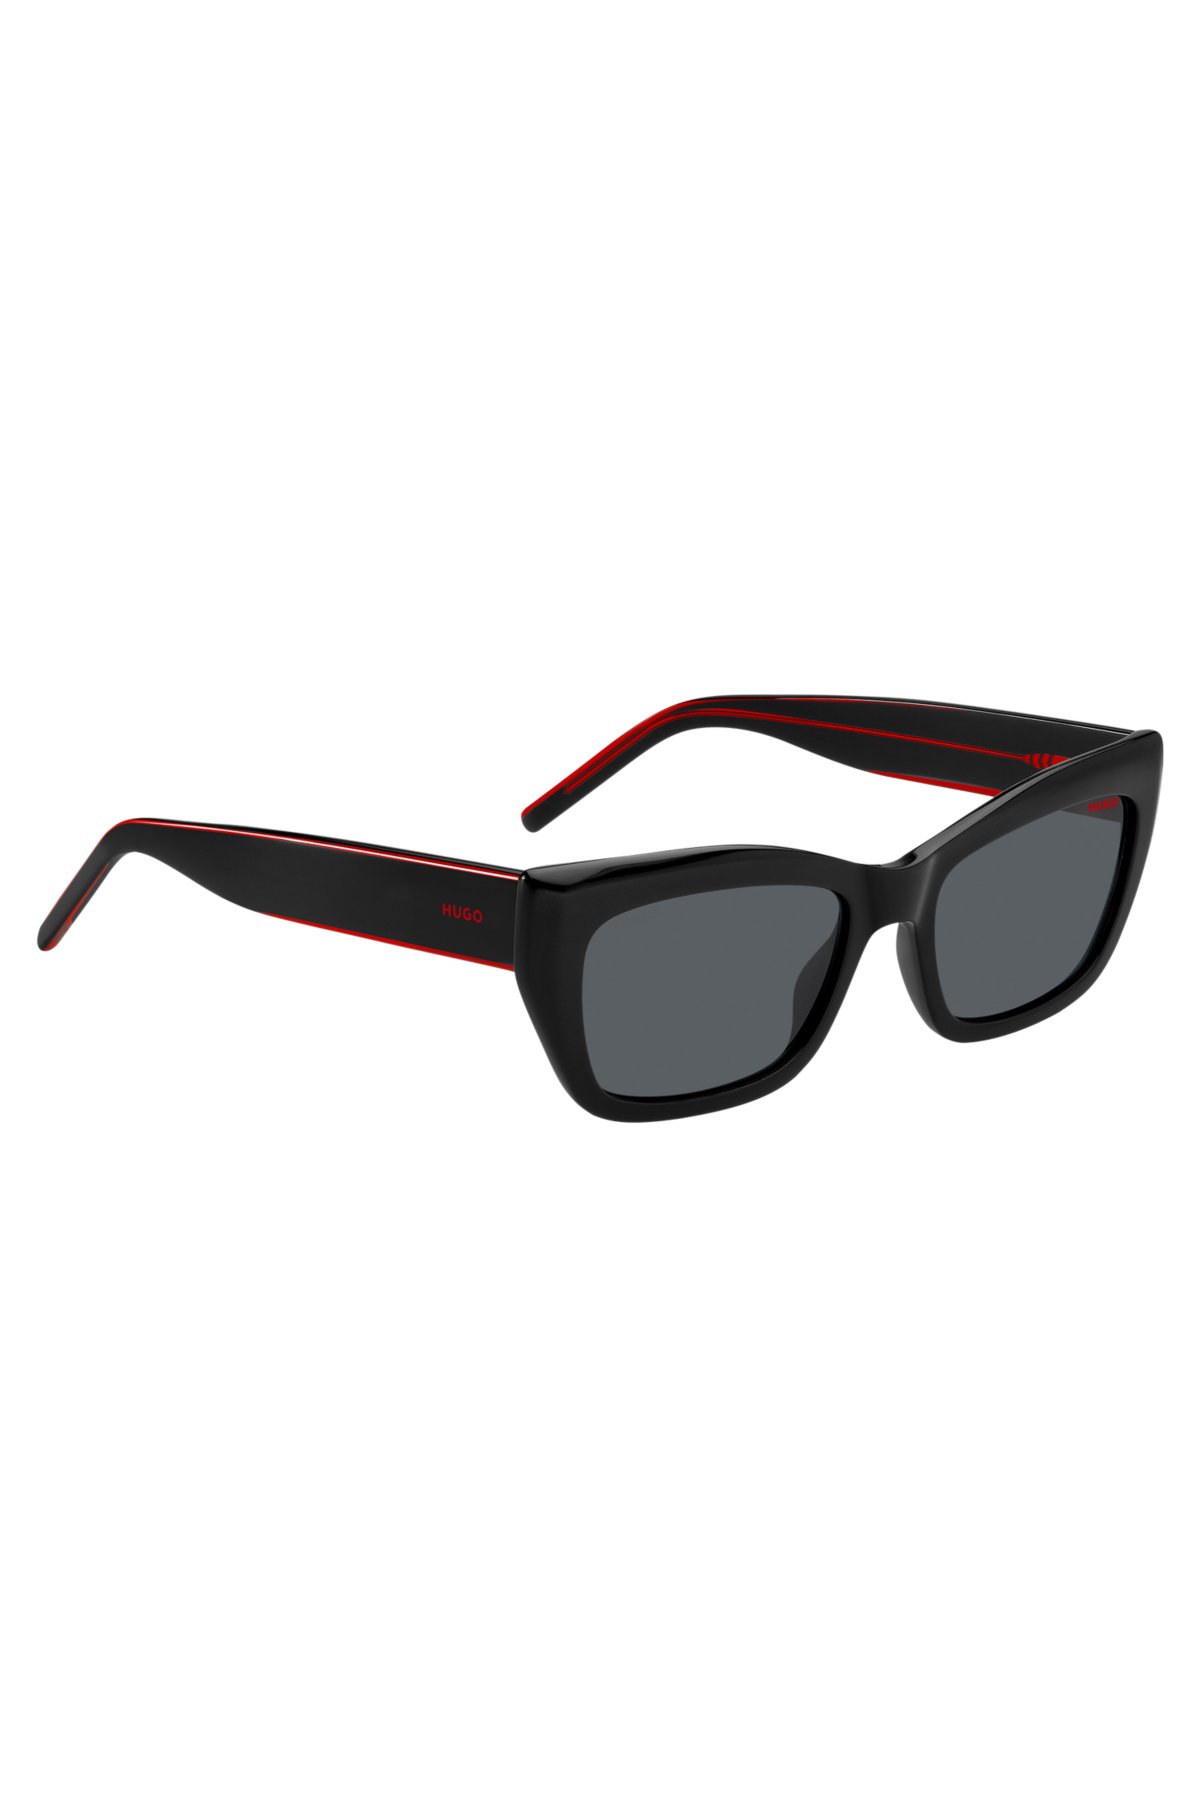 Black-acetate sunglasses with signature-red layered temples, Black